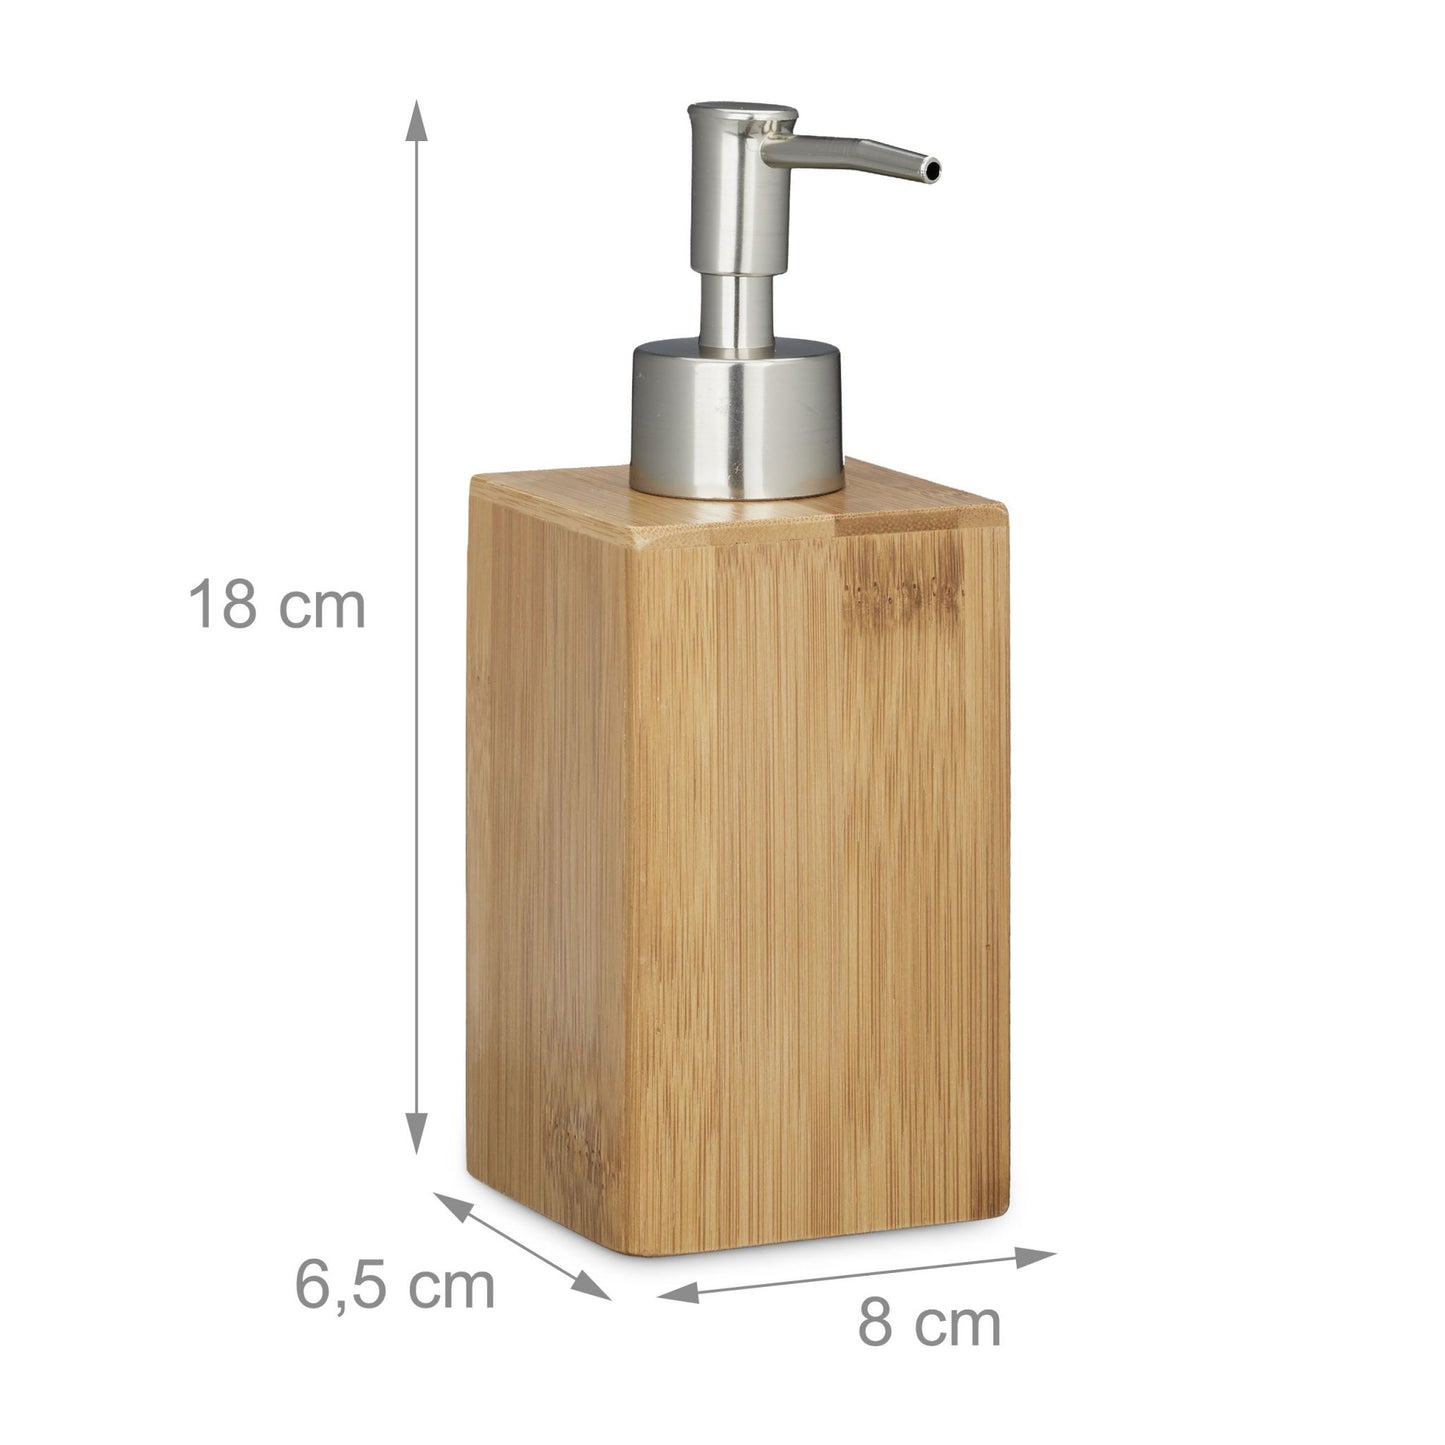 RelaxDays Square Bamboo Soap Dispenser Bamboo Bathrooms